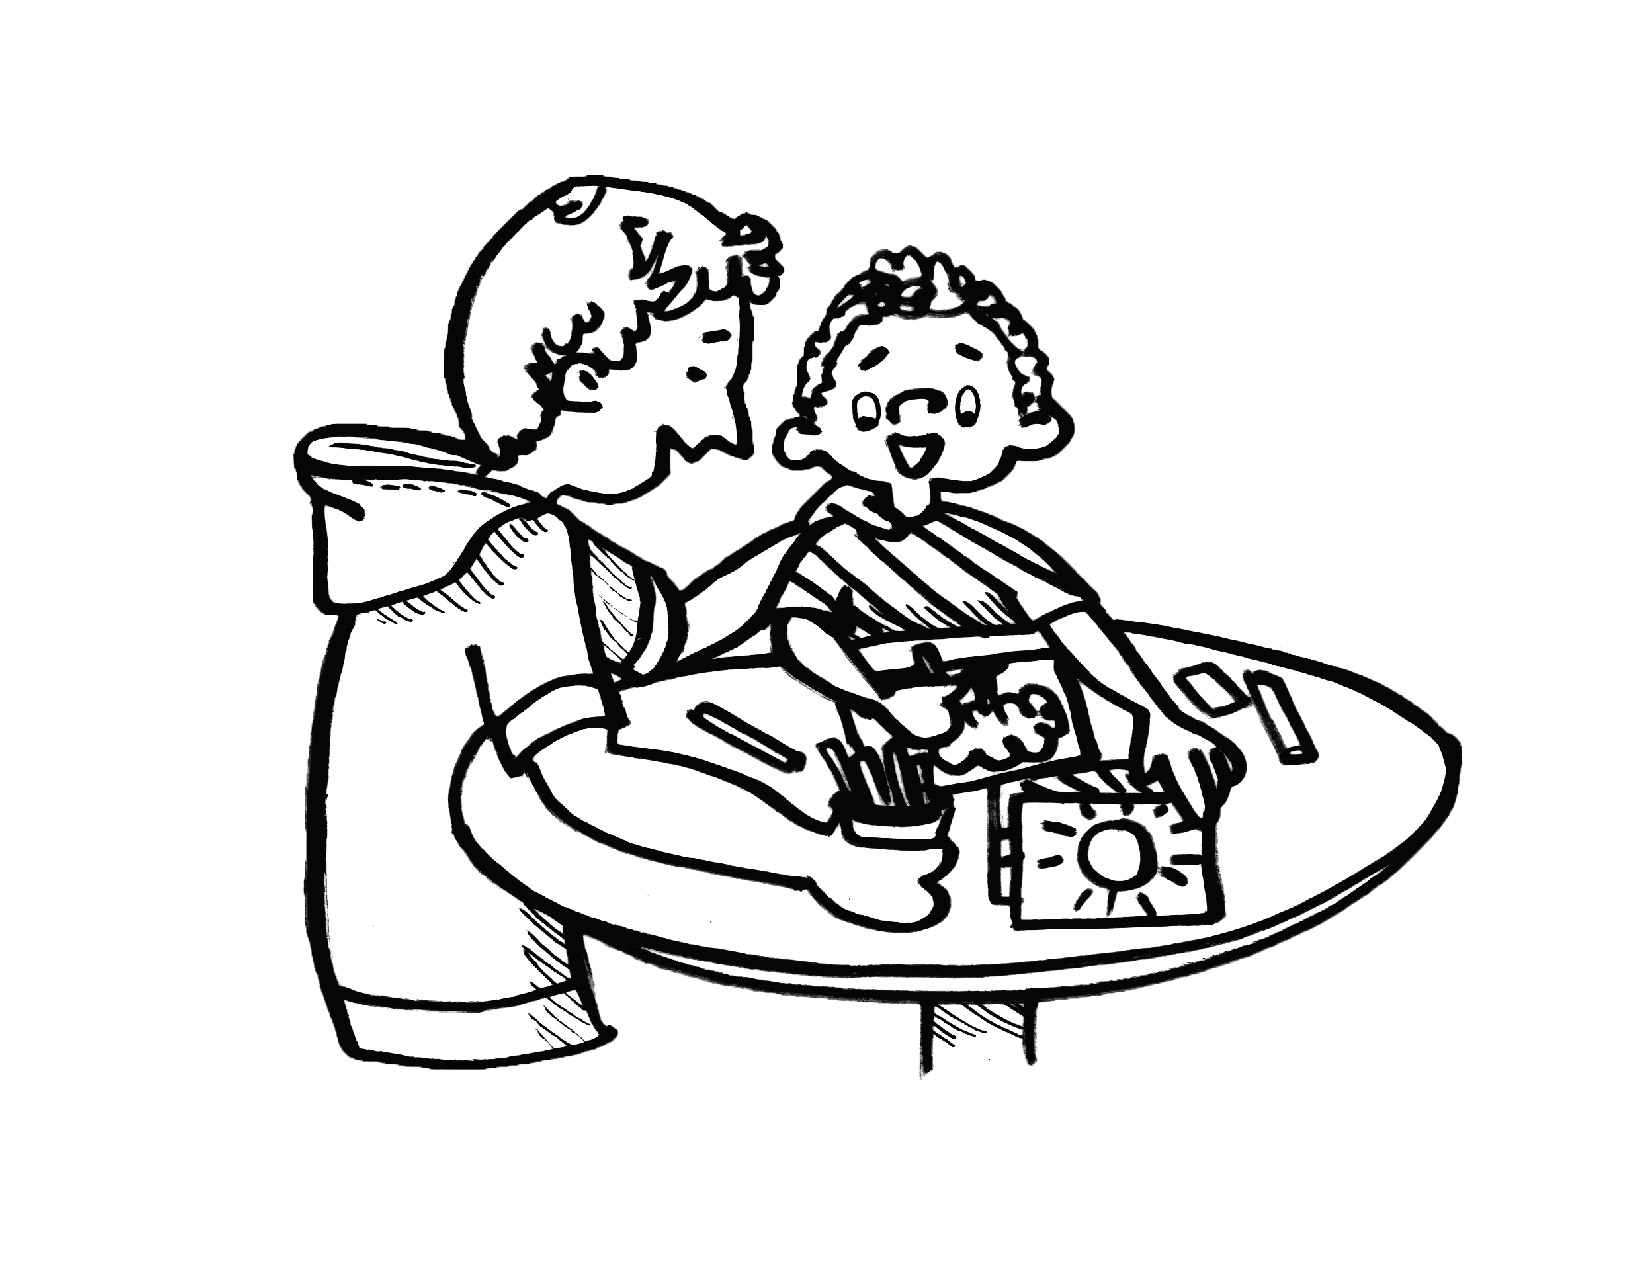 Coloring page of a dad and kid working together